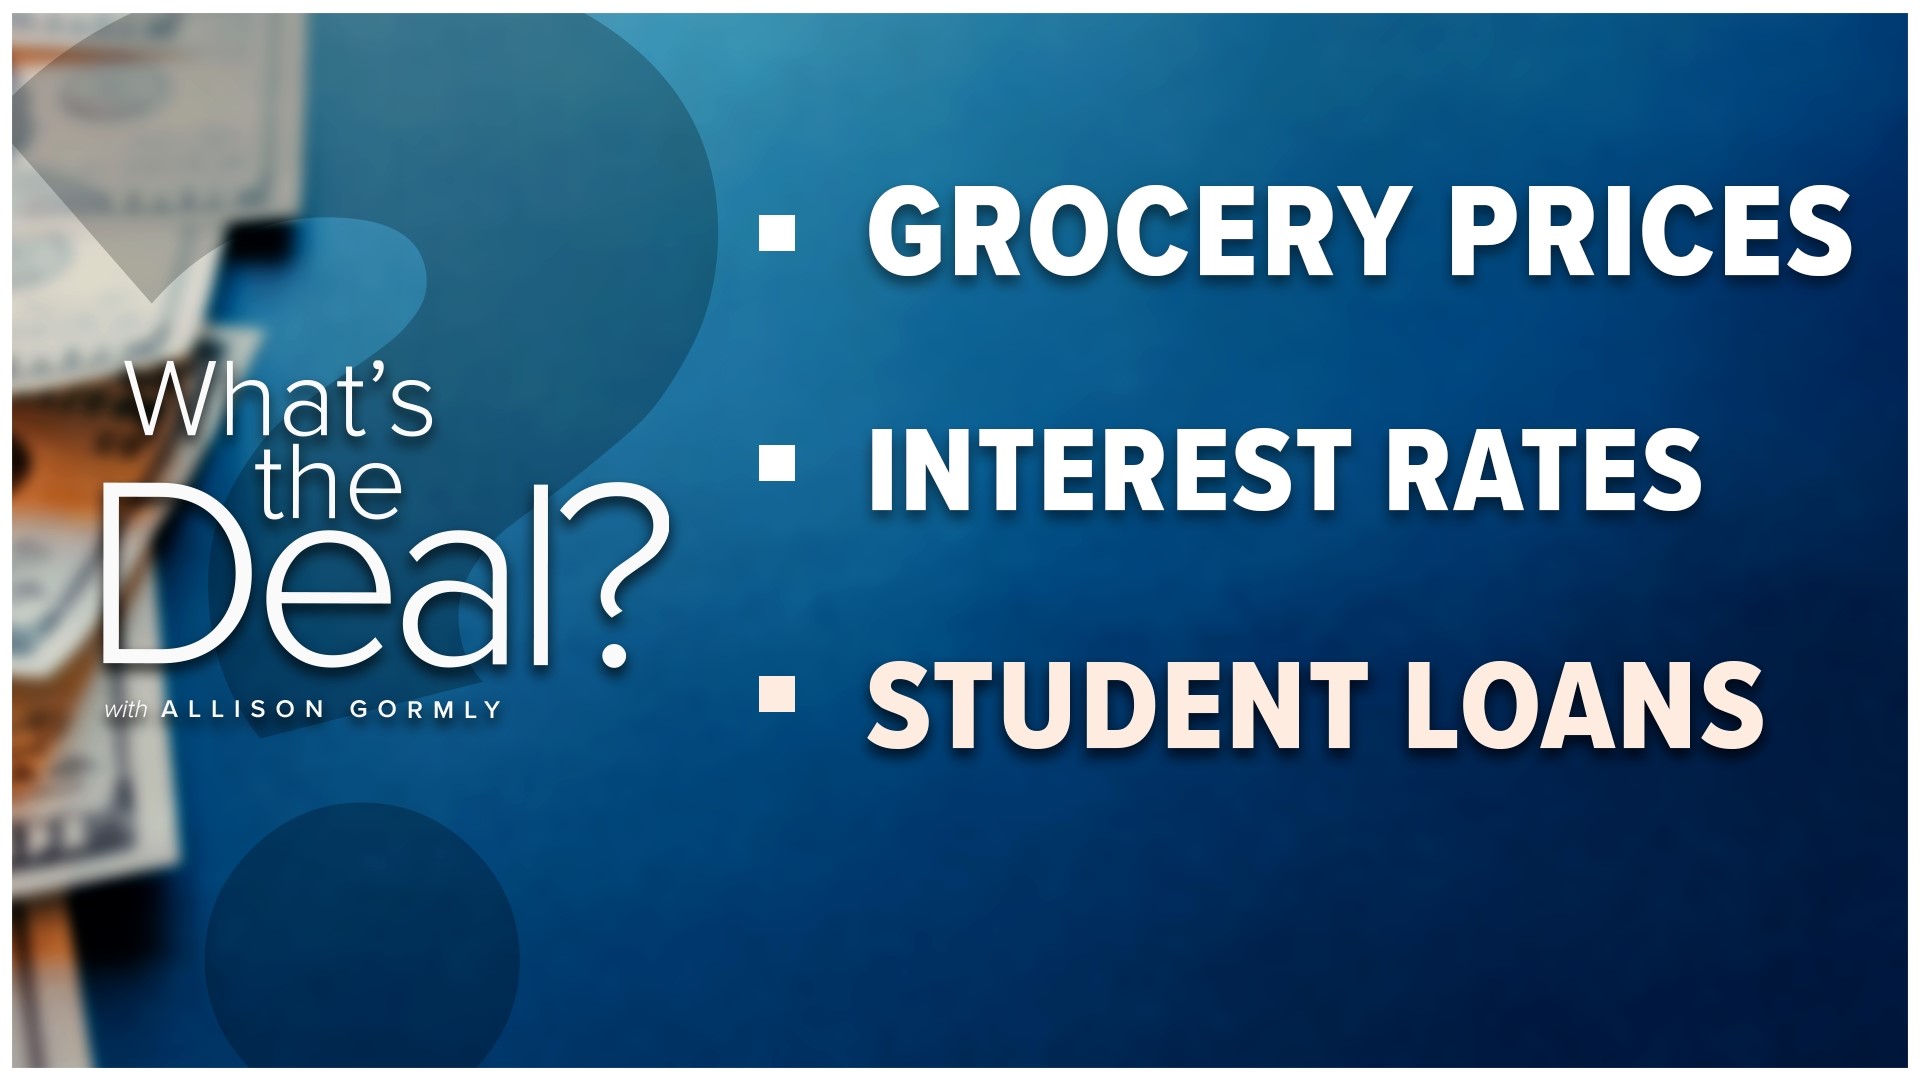 A look at what's the deal with rising grocery prices, combating credit card debt due to an interest rate increase, figuring out student loans and more.